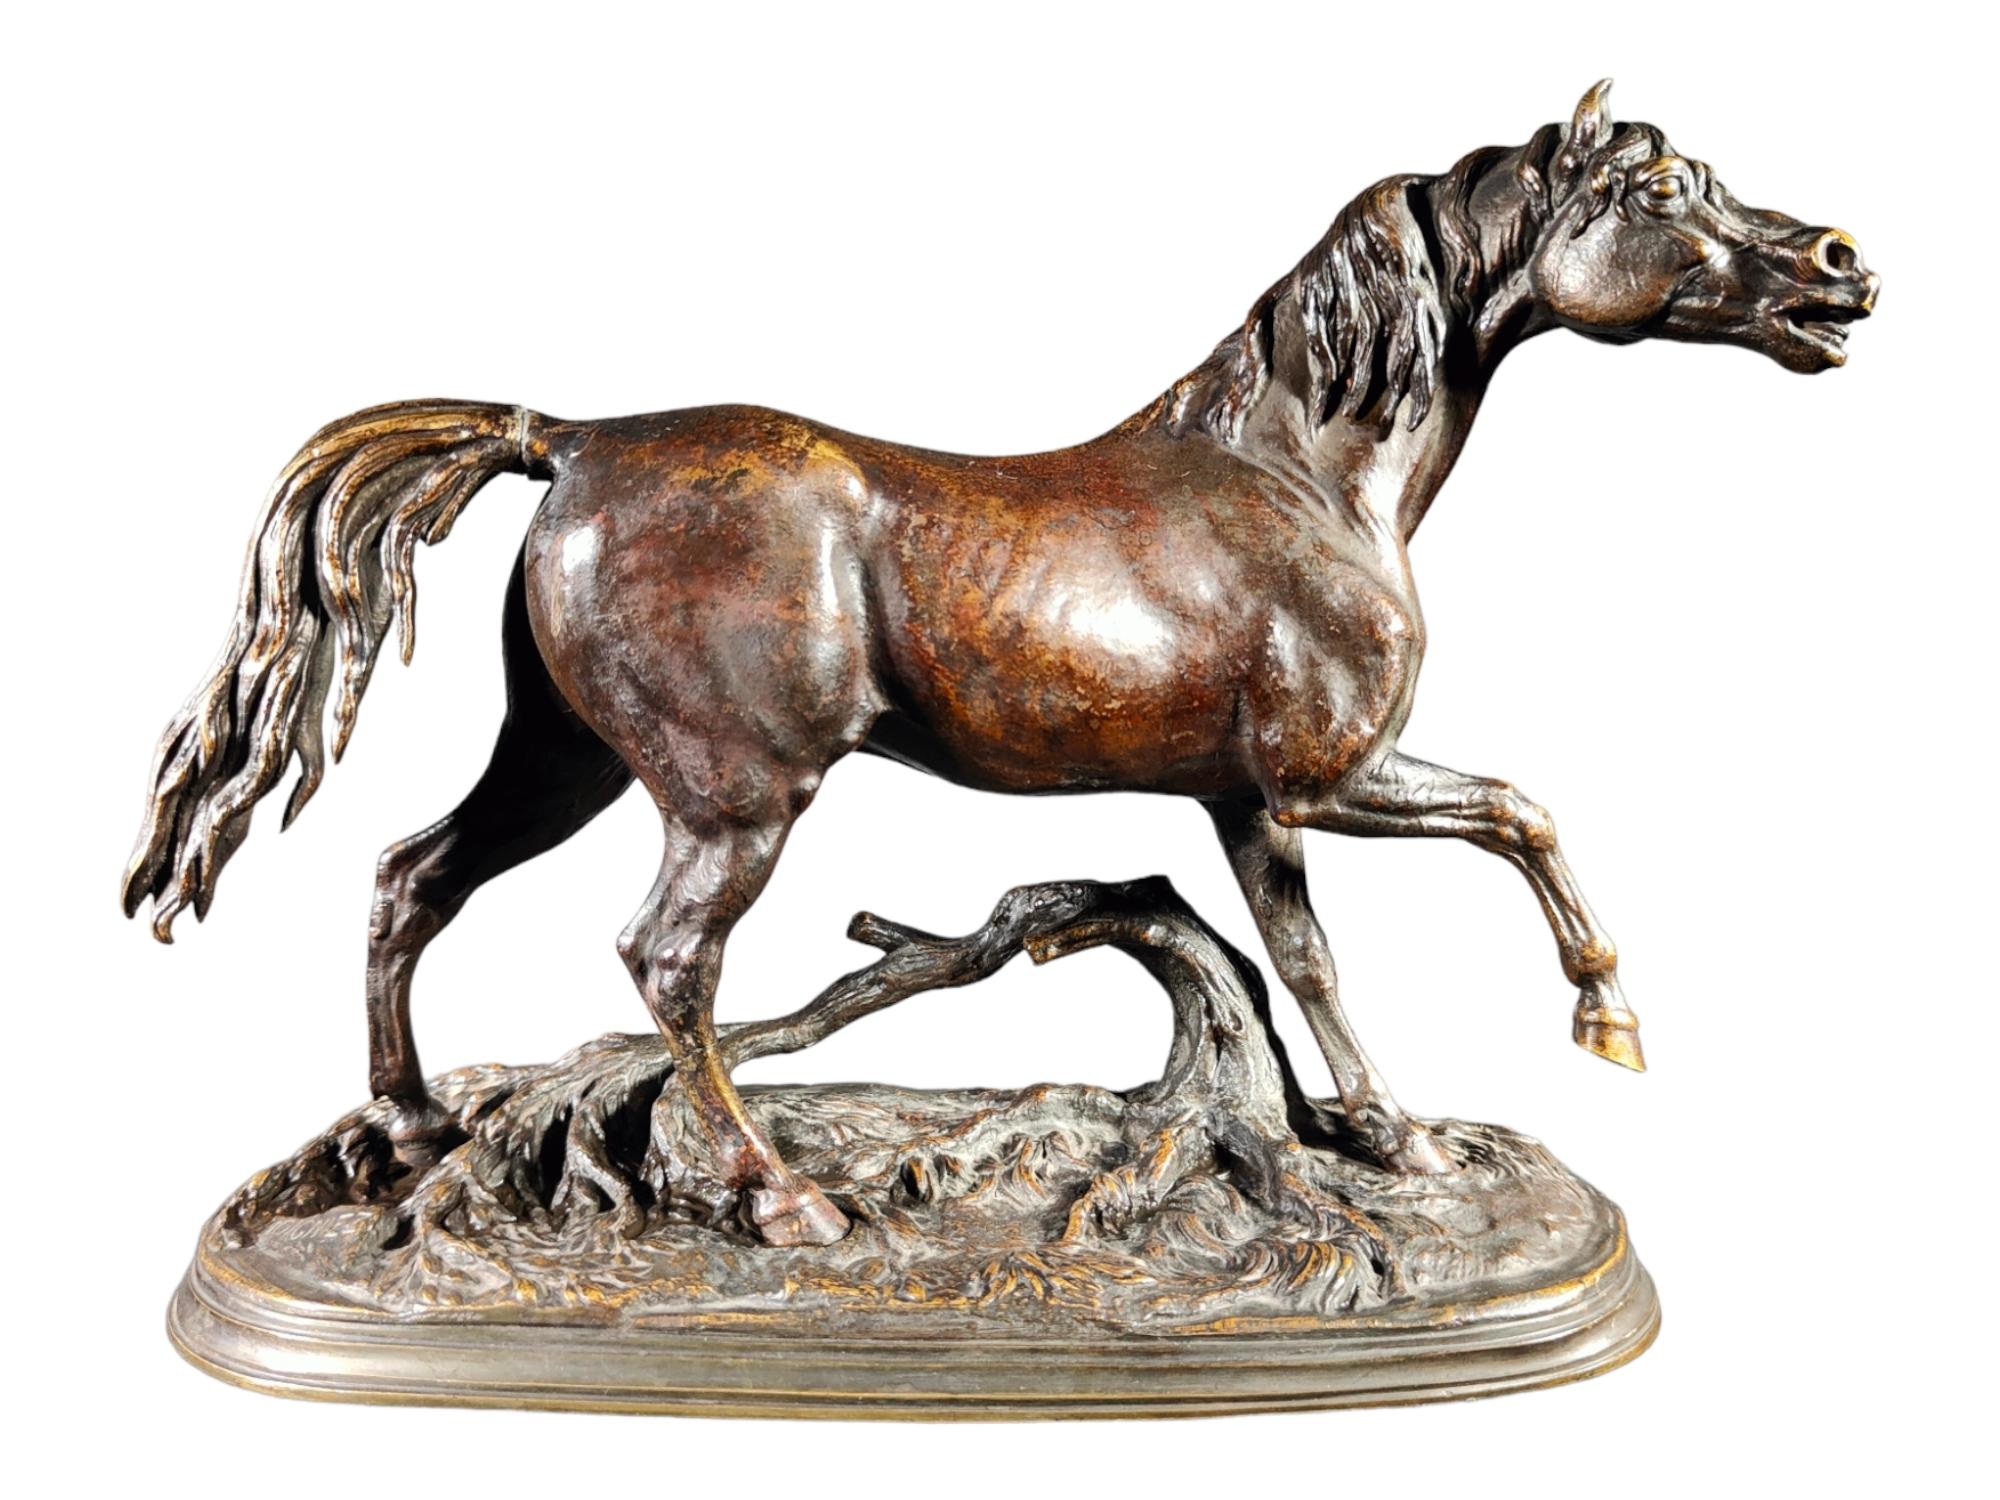 Jules Moigniez (1835-1894) bronze horse
Very pretty bronze horse signed by J Moigniez from the XIX century. It has a very nice patina that it has acquired over the years and the anatomical execution is excellent. Measures: 28 x 21 x 11 cm.